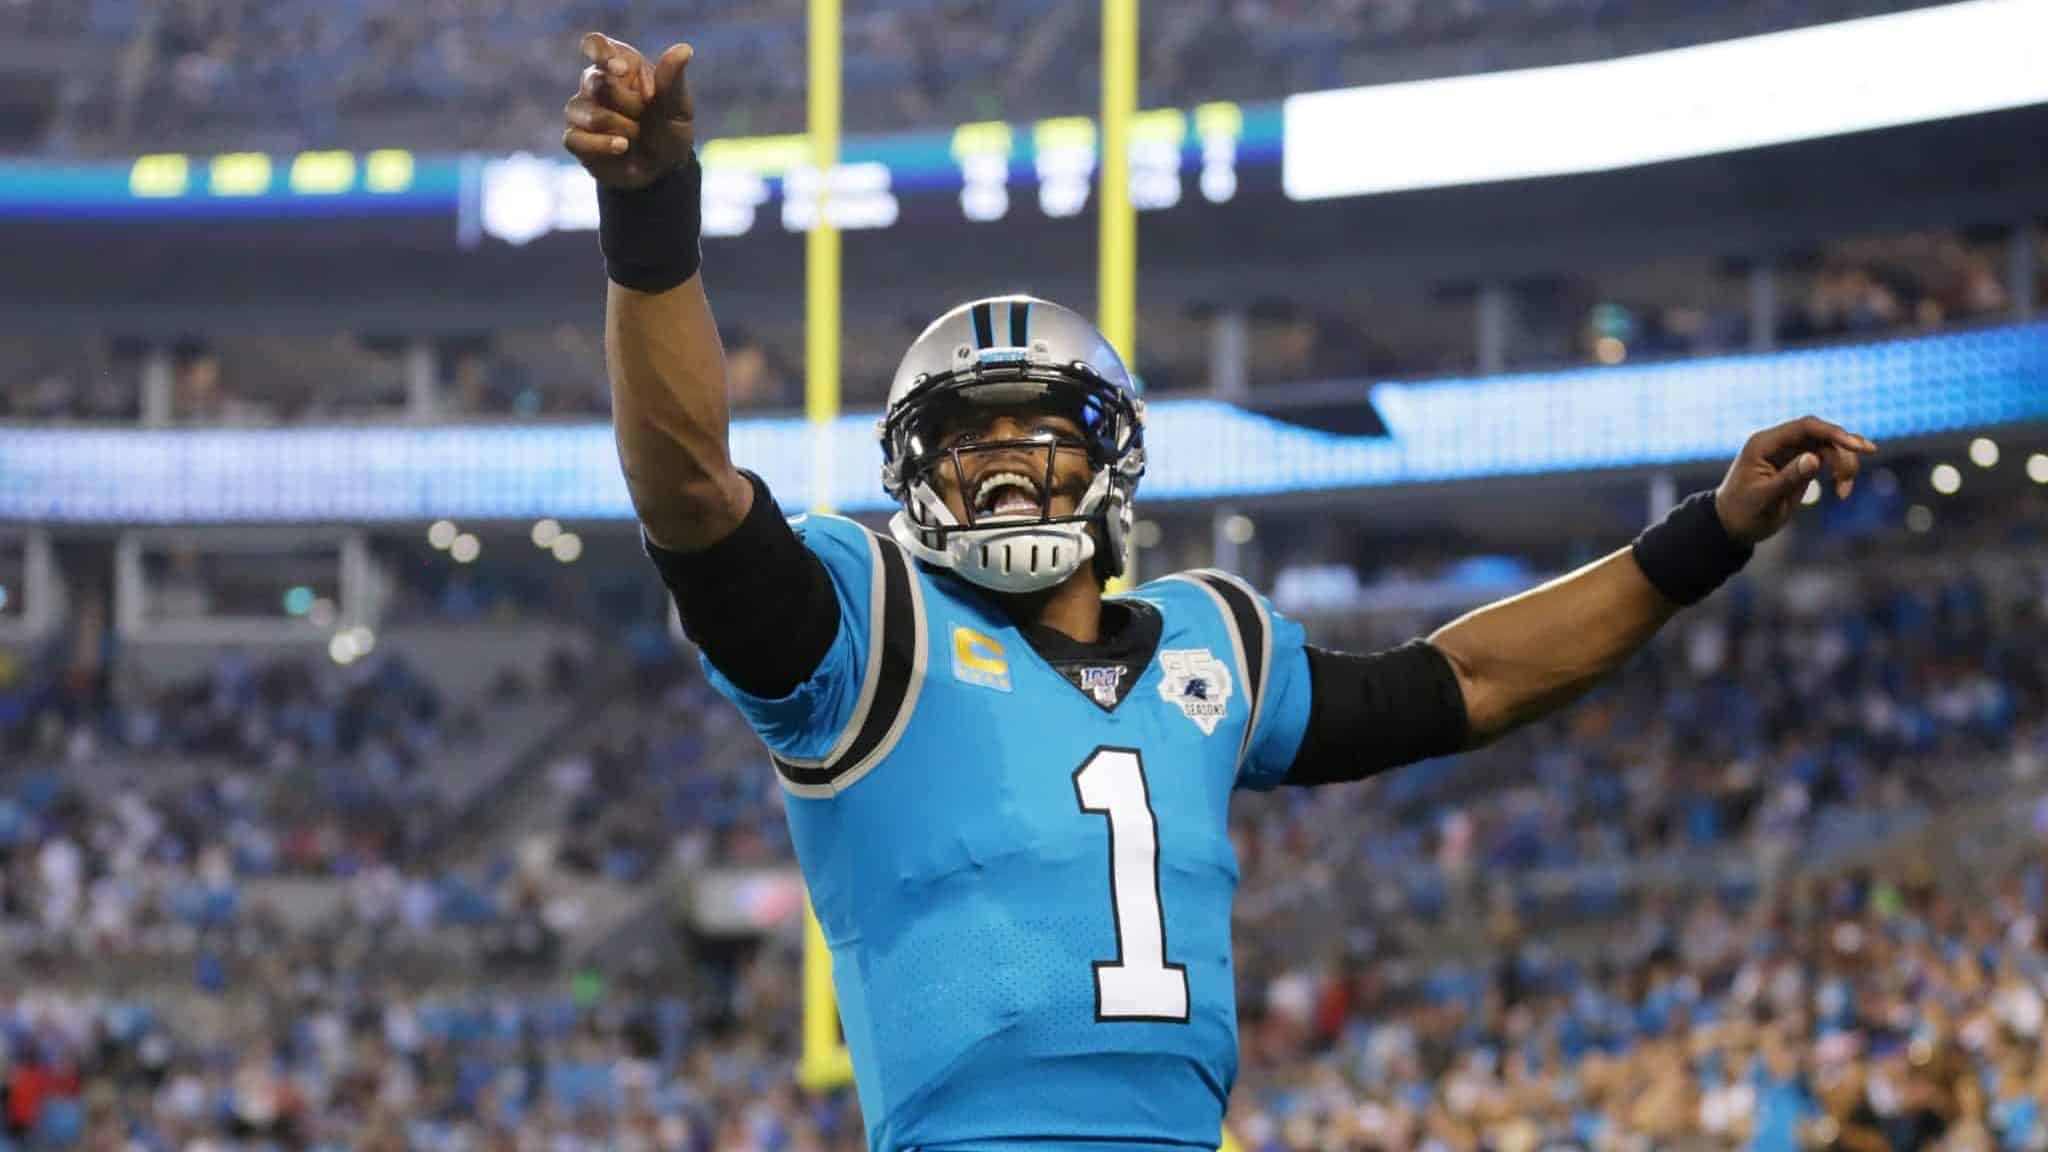 CHARLOTTE, NORTH CAROLINA - SEPTEMBER 12: Quarterback Cam Newton #1 of the Carolina Panthers reacts in the first quarter of the game against the Tampa Bay Buccaneers at Bank of America Stadium on September 12, 2019 in Charlotte, North Carolina.